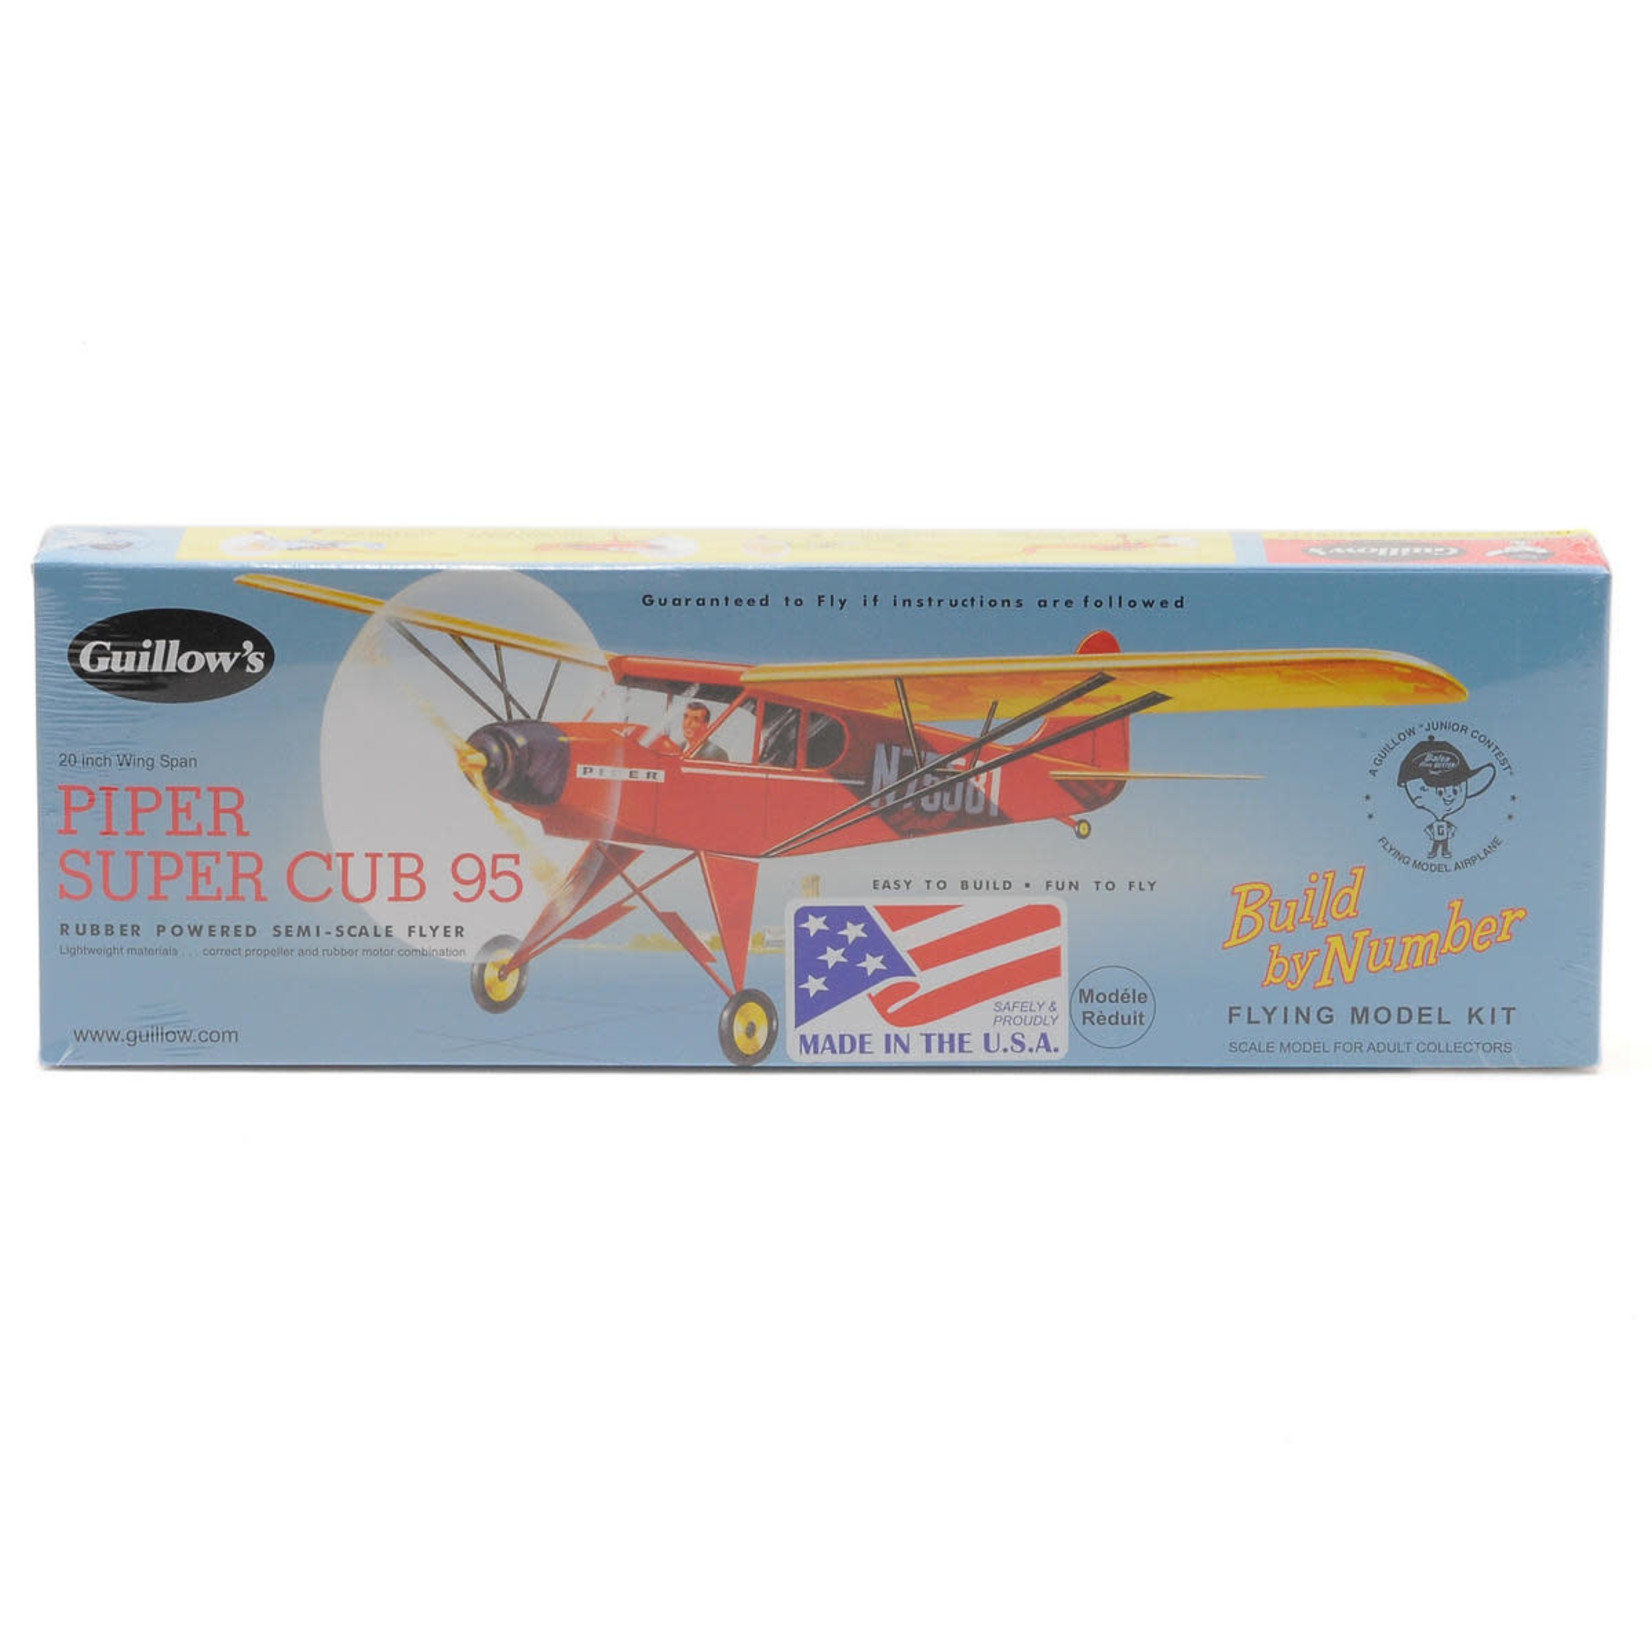 Guillow Guillow Piper Super Cub 95 Rubber Powered Semi-Scale Flyer #602